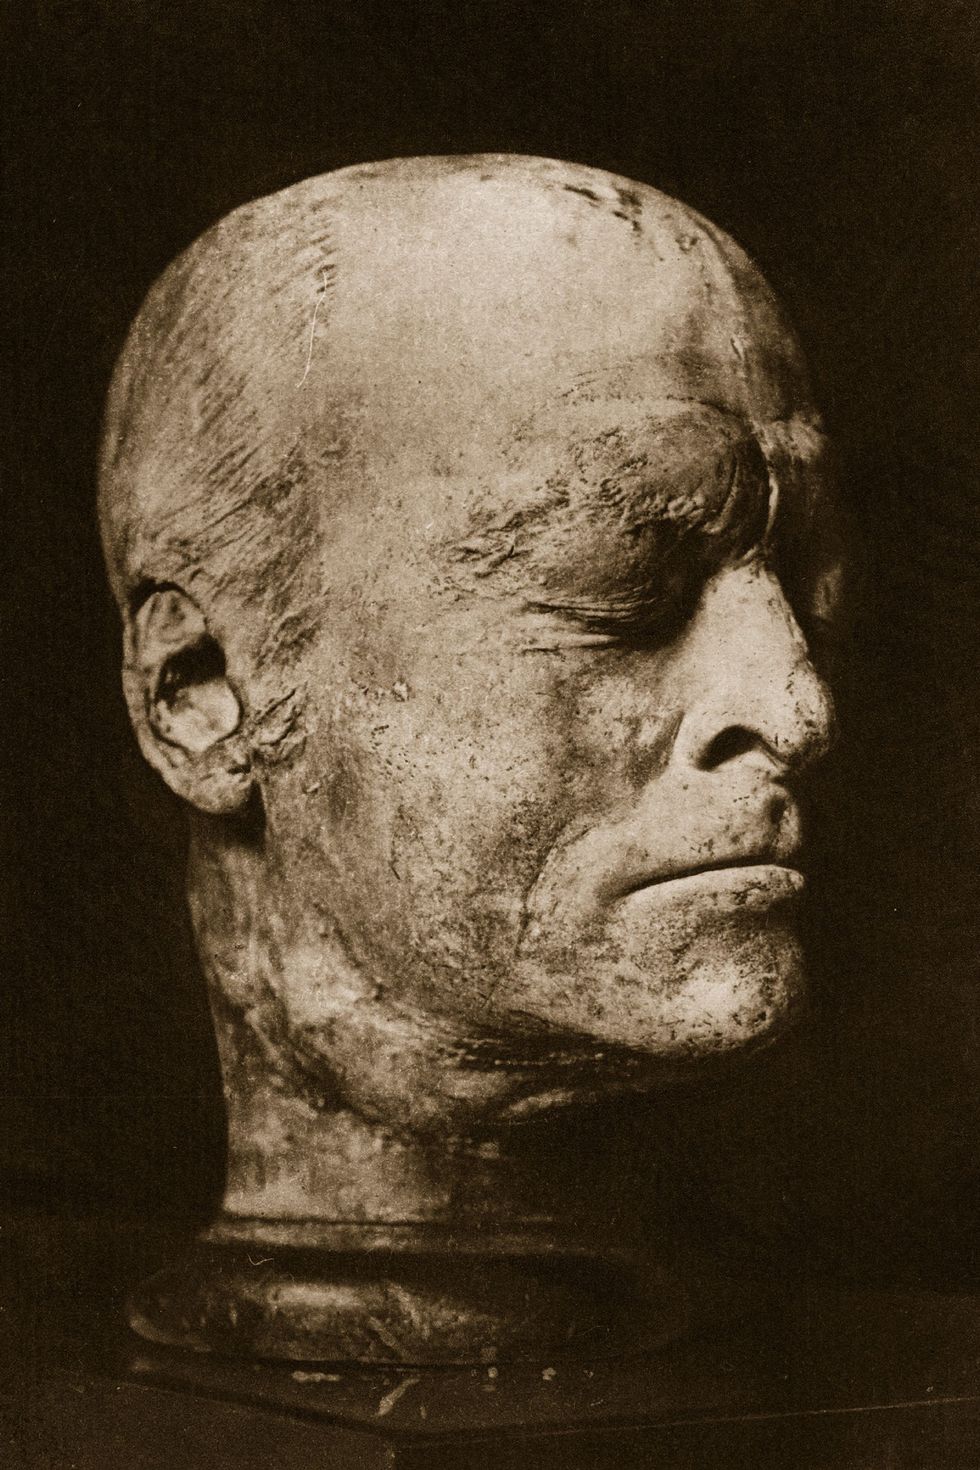 The death mask of English painter, poet and engraver William Blake (1757 - 1827). (Photo by Hulton Archive/Getty Images)